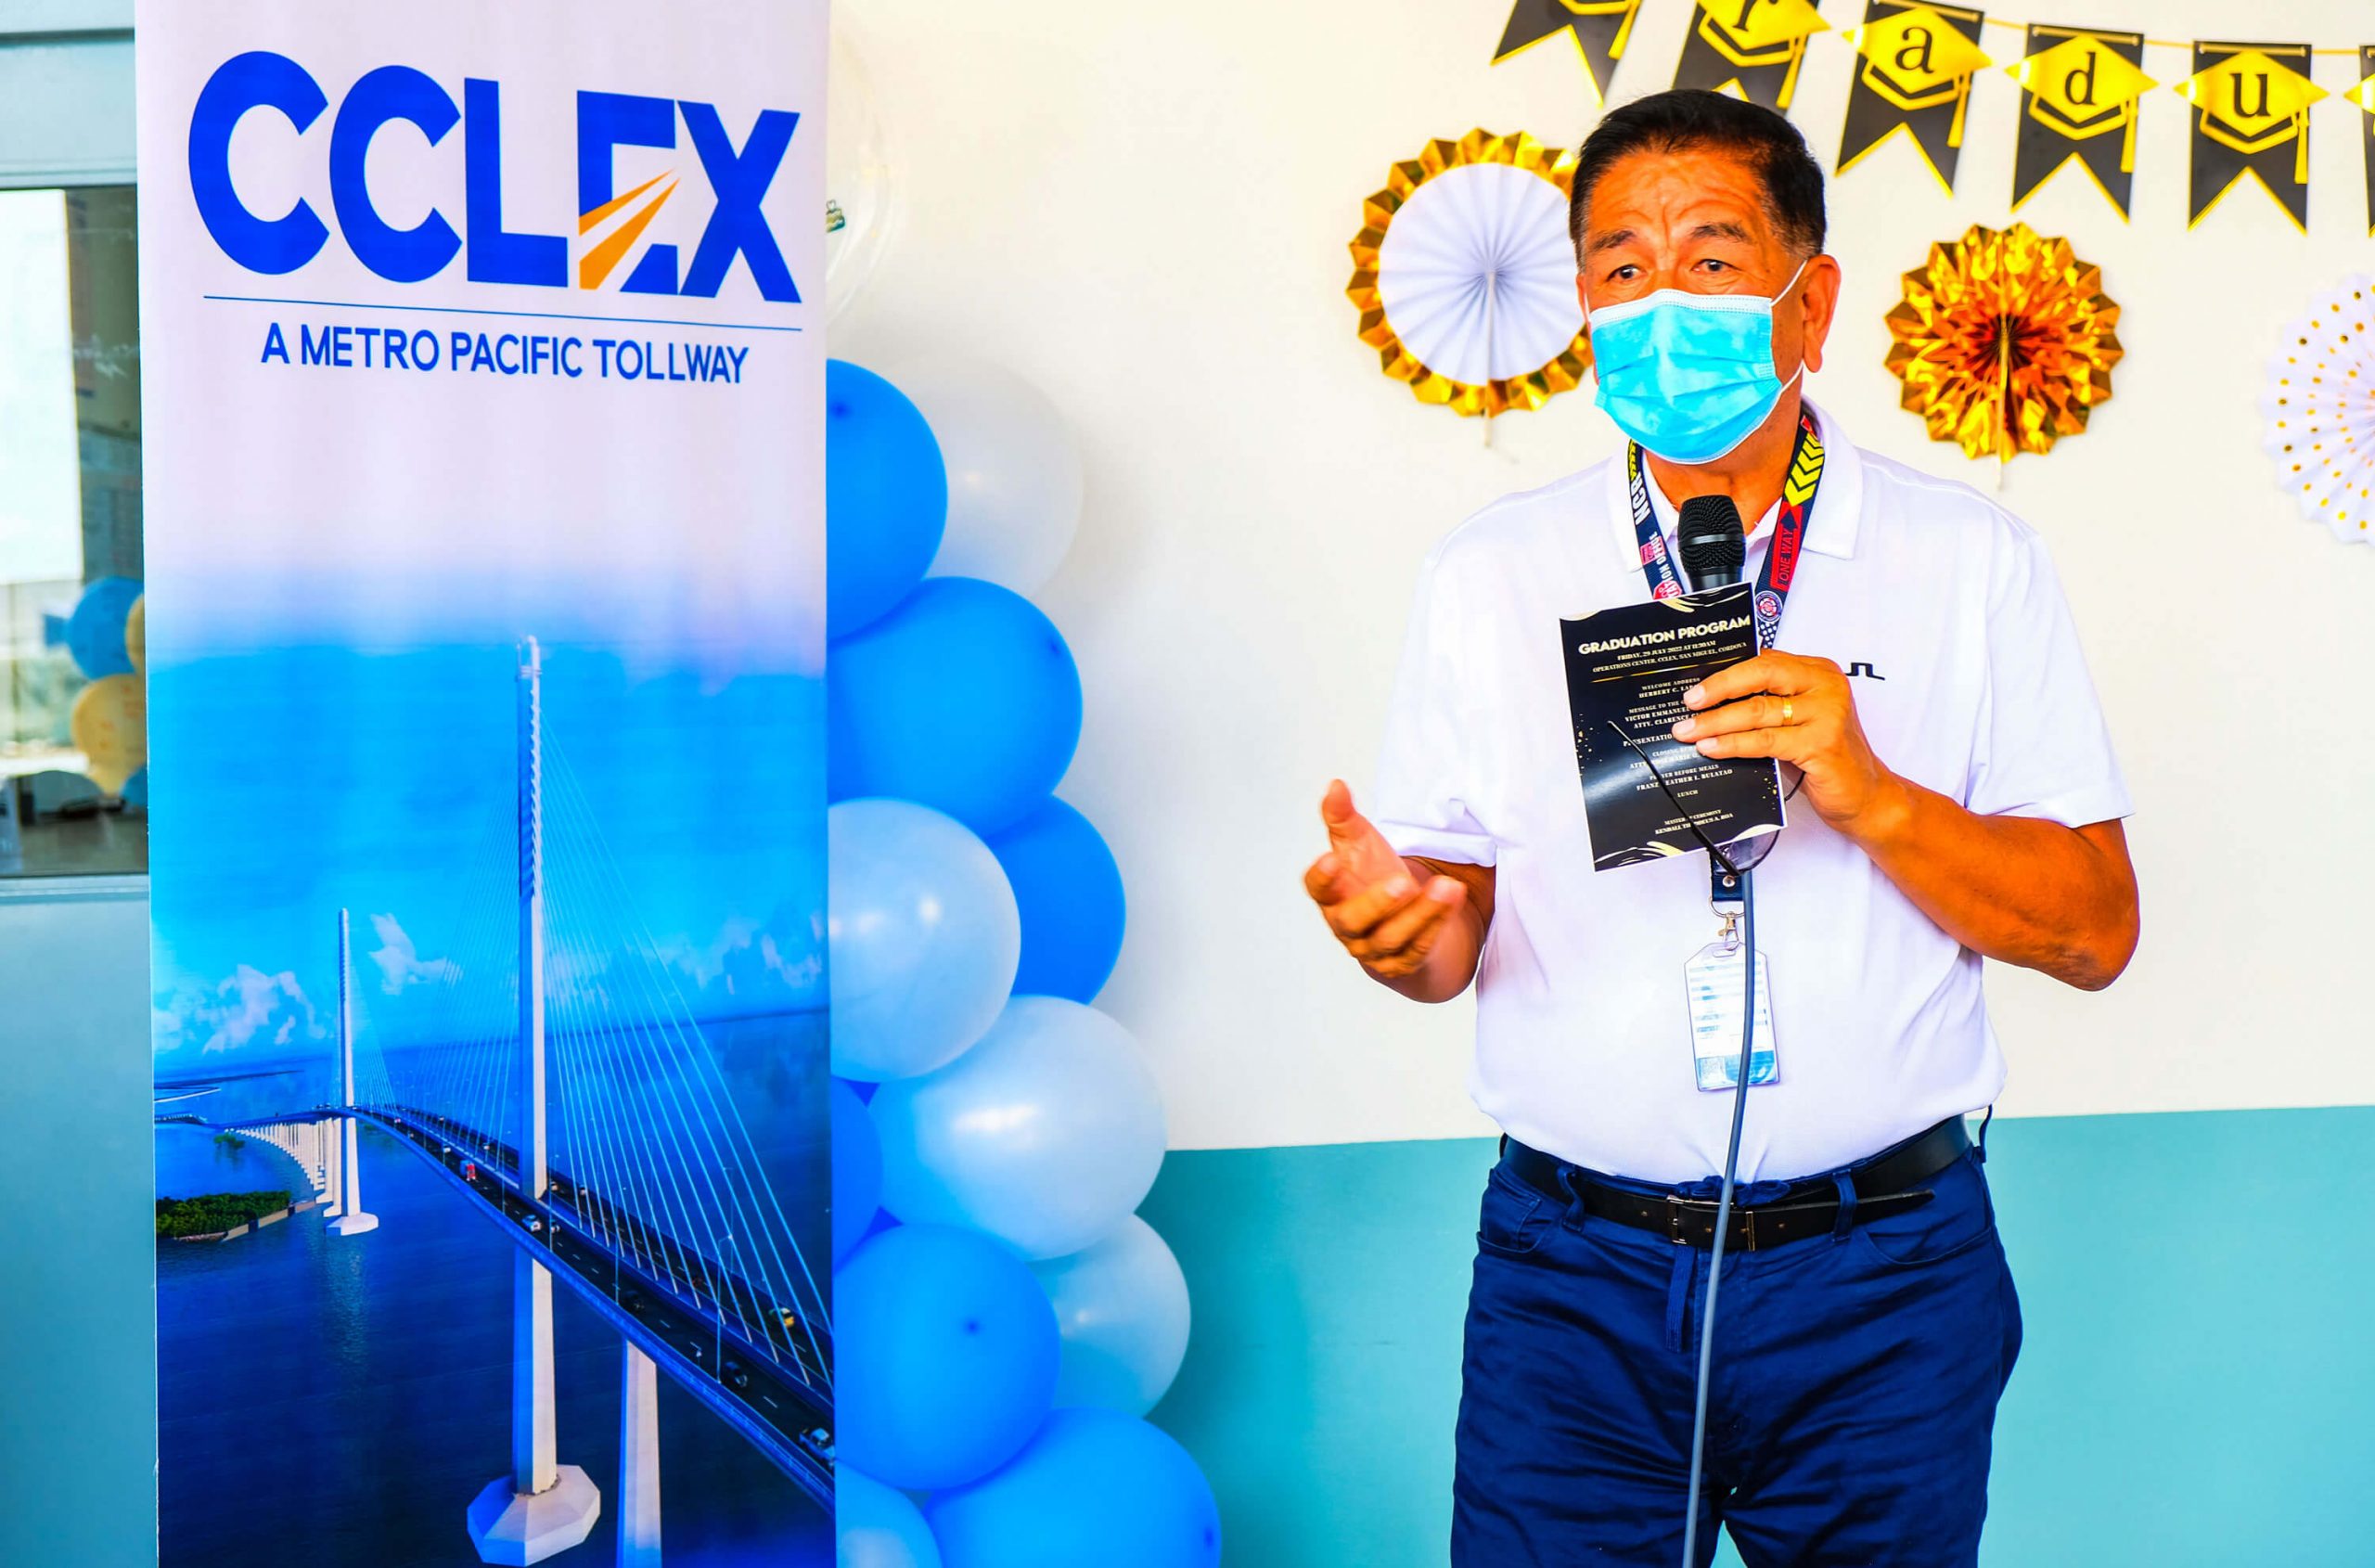 LTO Director for Law Enforcement Service and LTO-NCR West Regional Director Atty. Clarence Guinto speaks to the CCLEX patrol crews during their graduation ceremony on July 29, 2022 held at the CCLEX Toll Operations Center Building.